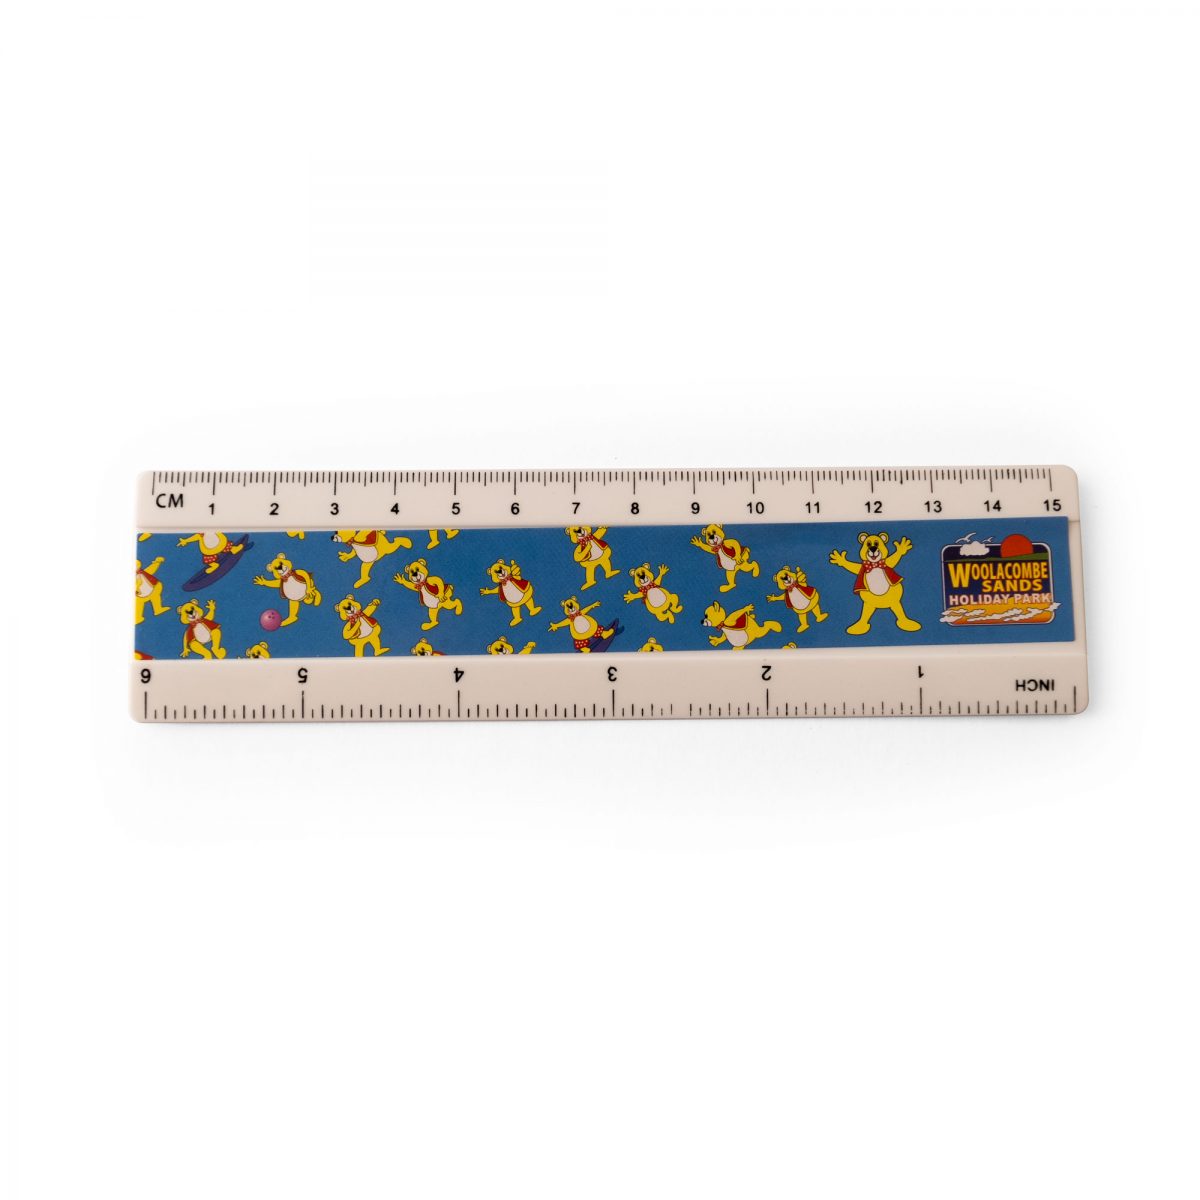 A Woolacombe Sands Holiday Ruler